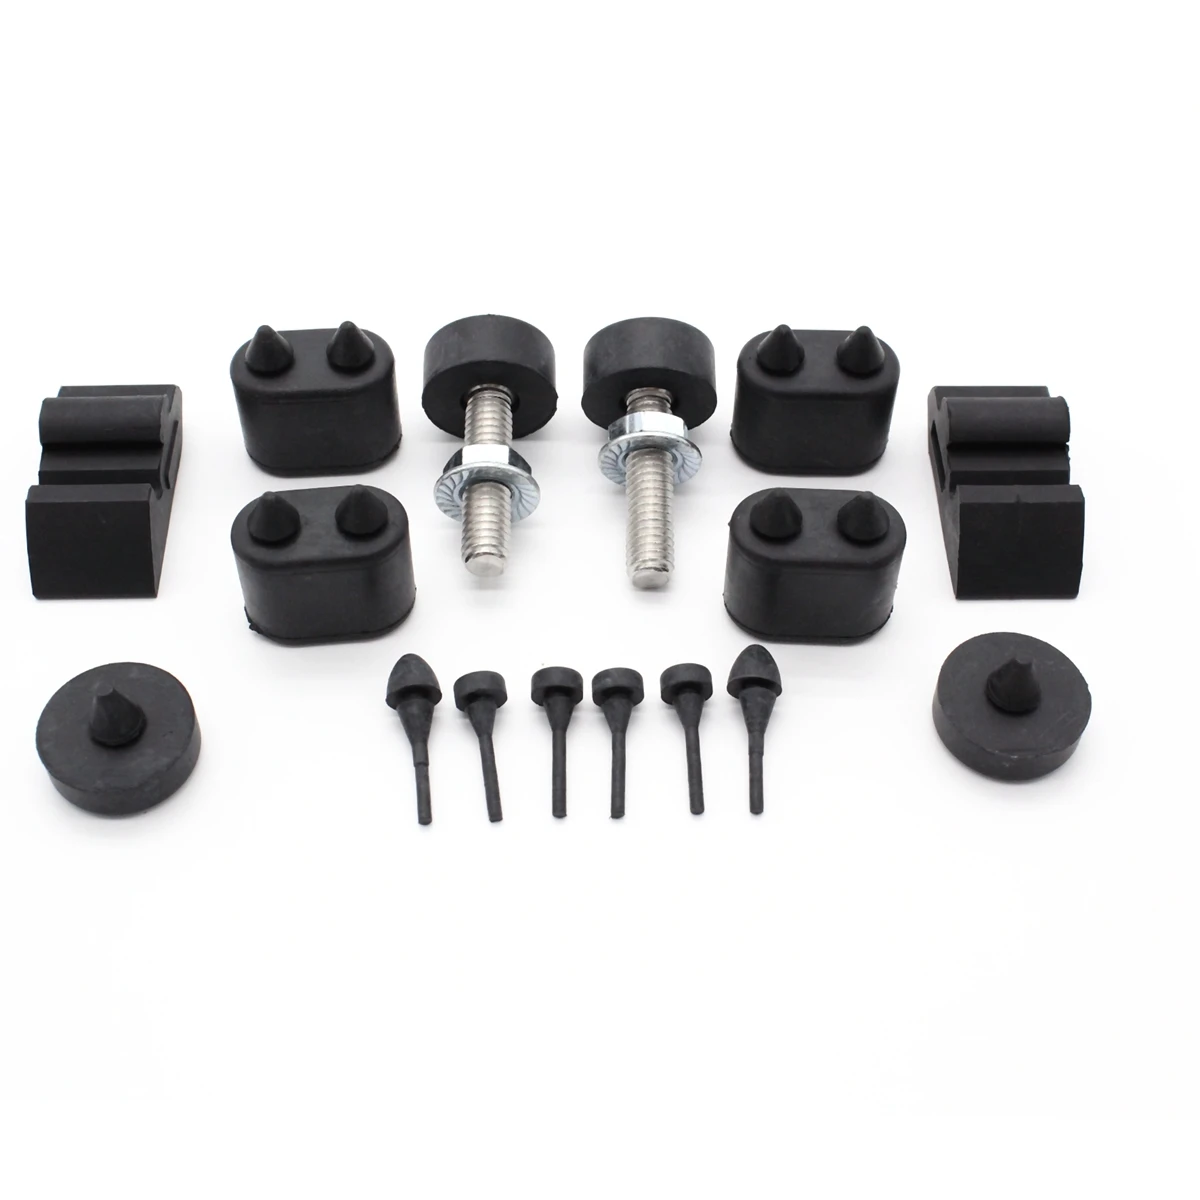 

Rubber Stopper Kit + Hood Adjusters for 1967-1981 Stoppers